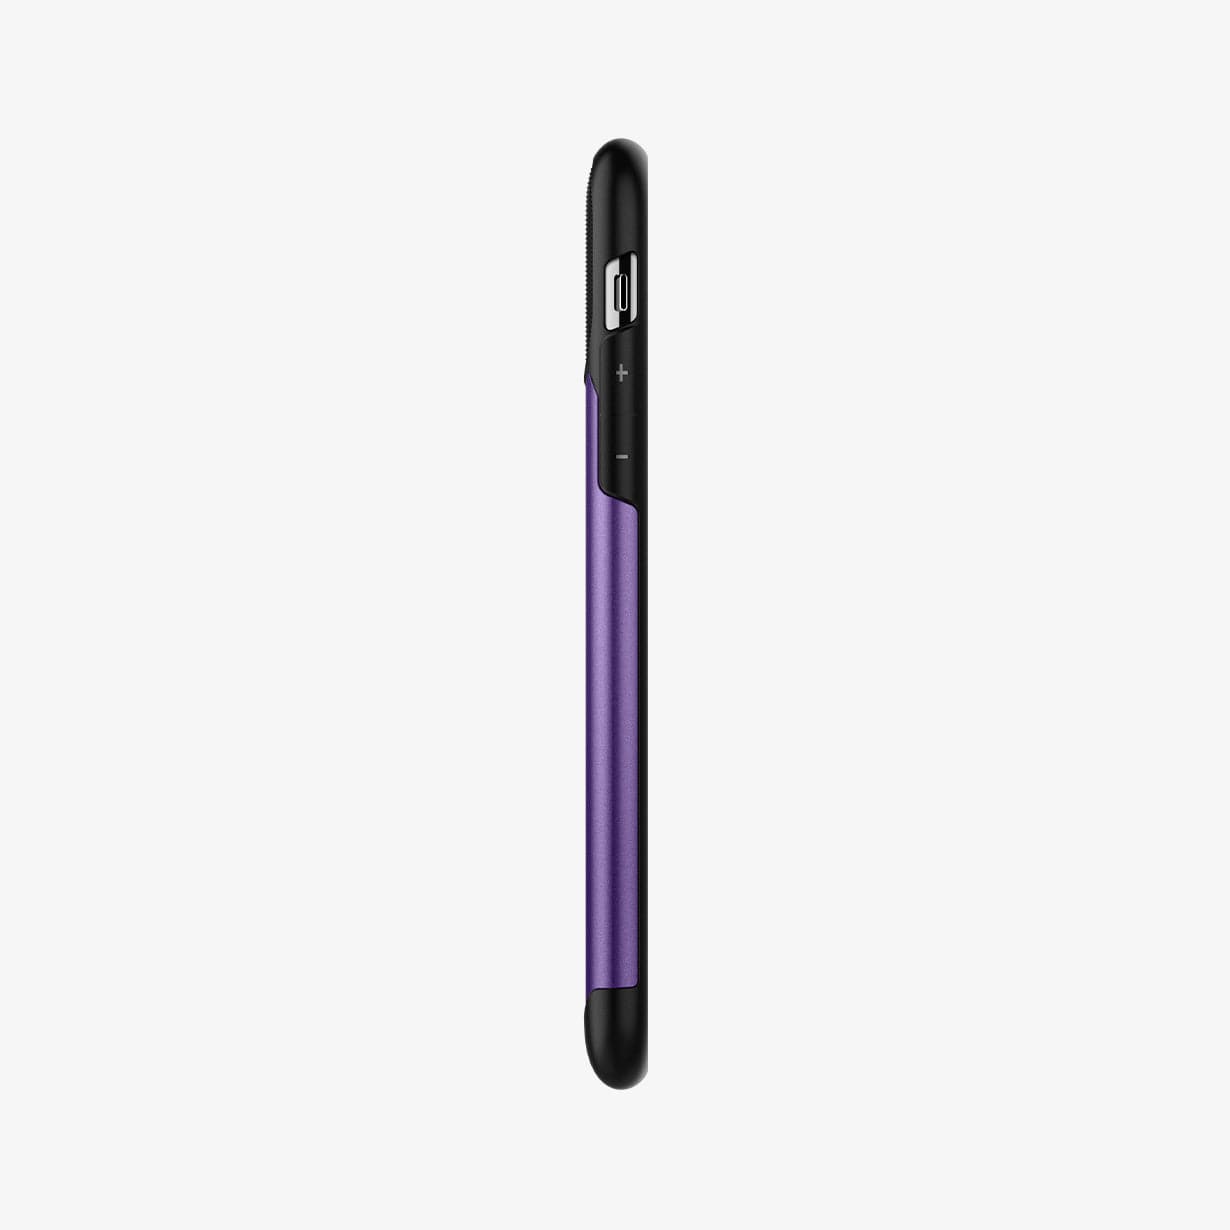 077CS27110 - iPhone 11 Pro Case Slim Armor in purple showing the side with volume controls